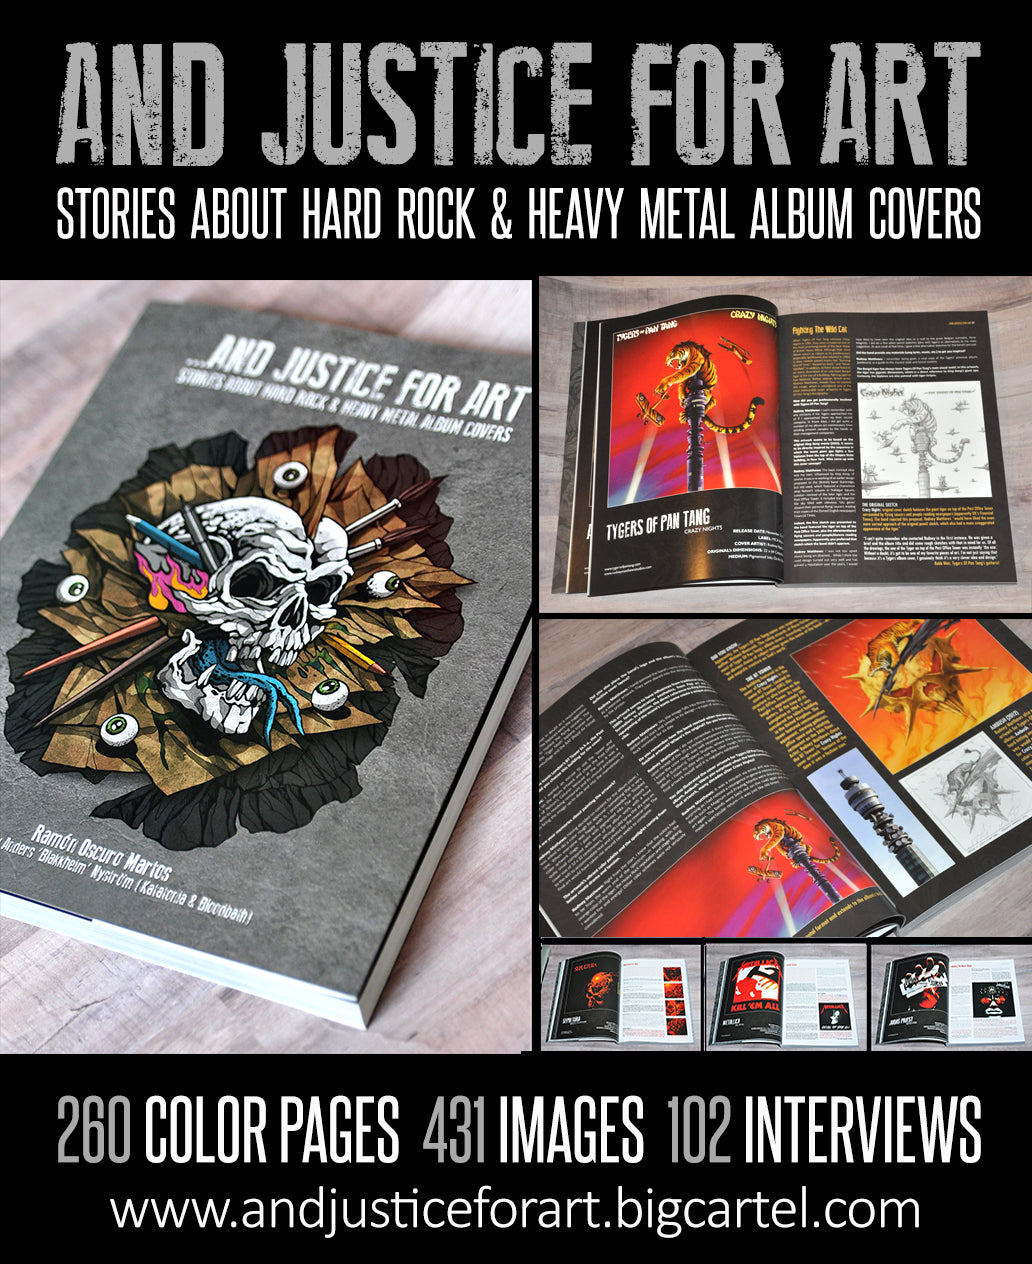 And Justice for Art - Stories About Hard Rock and Heavy Metal Album Covers